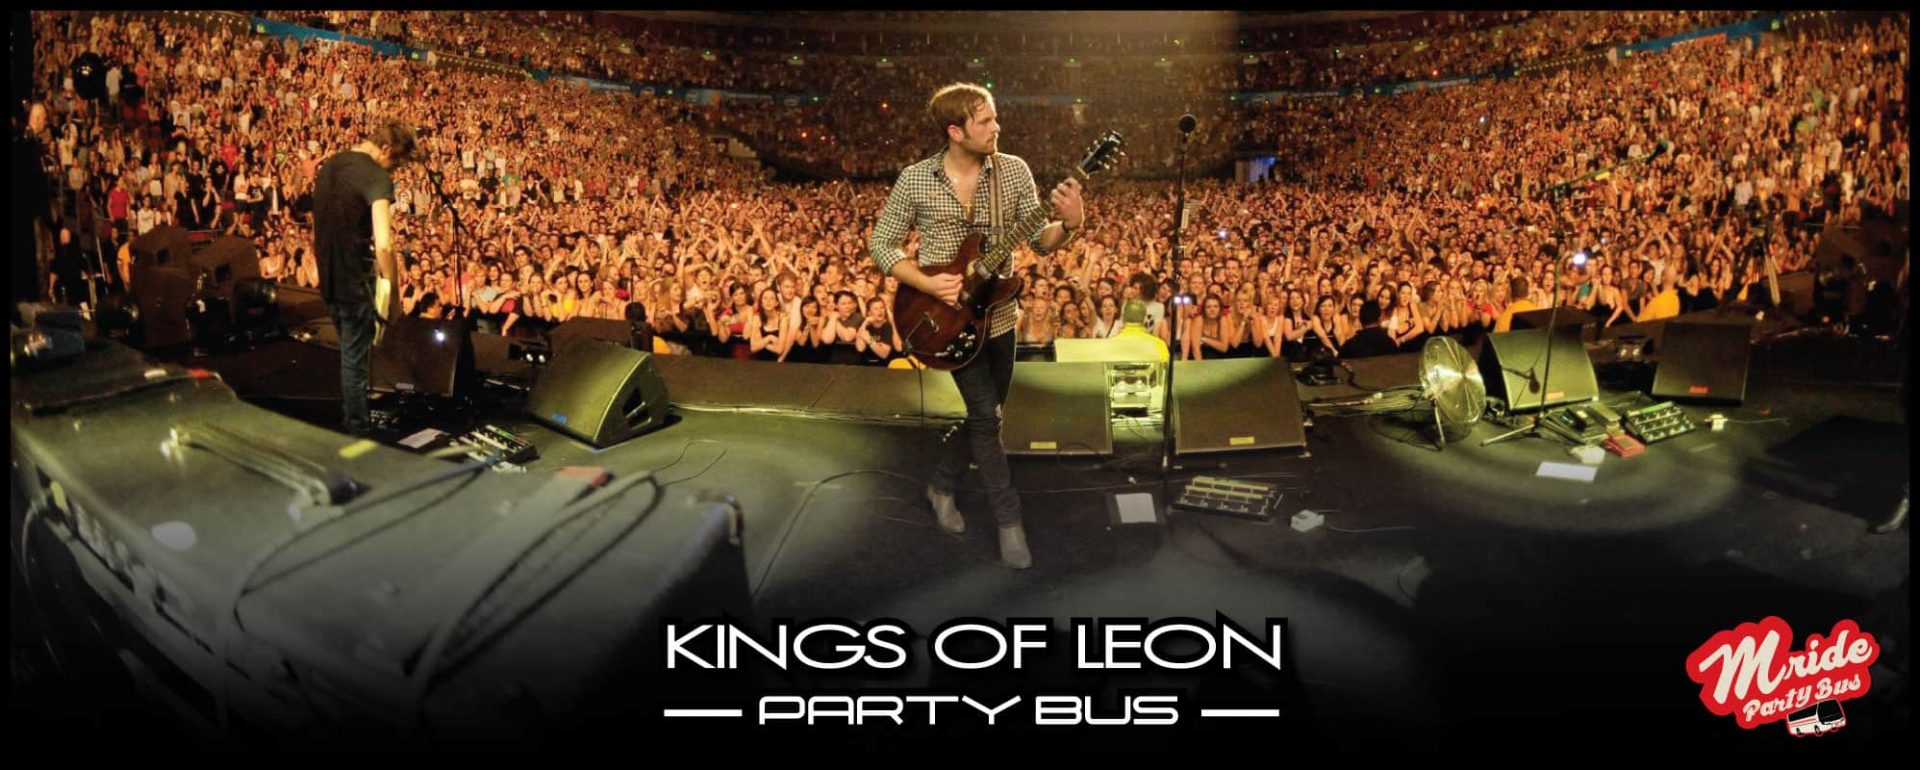 Kings of Leon Party Bus